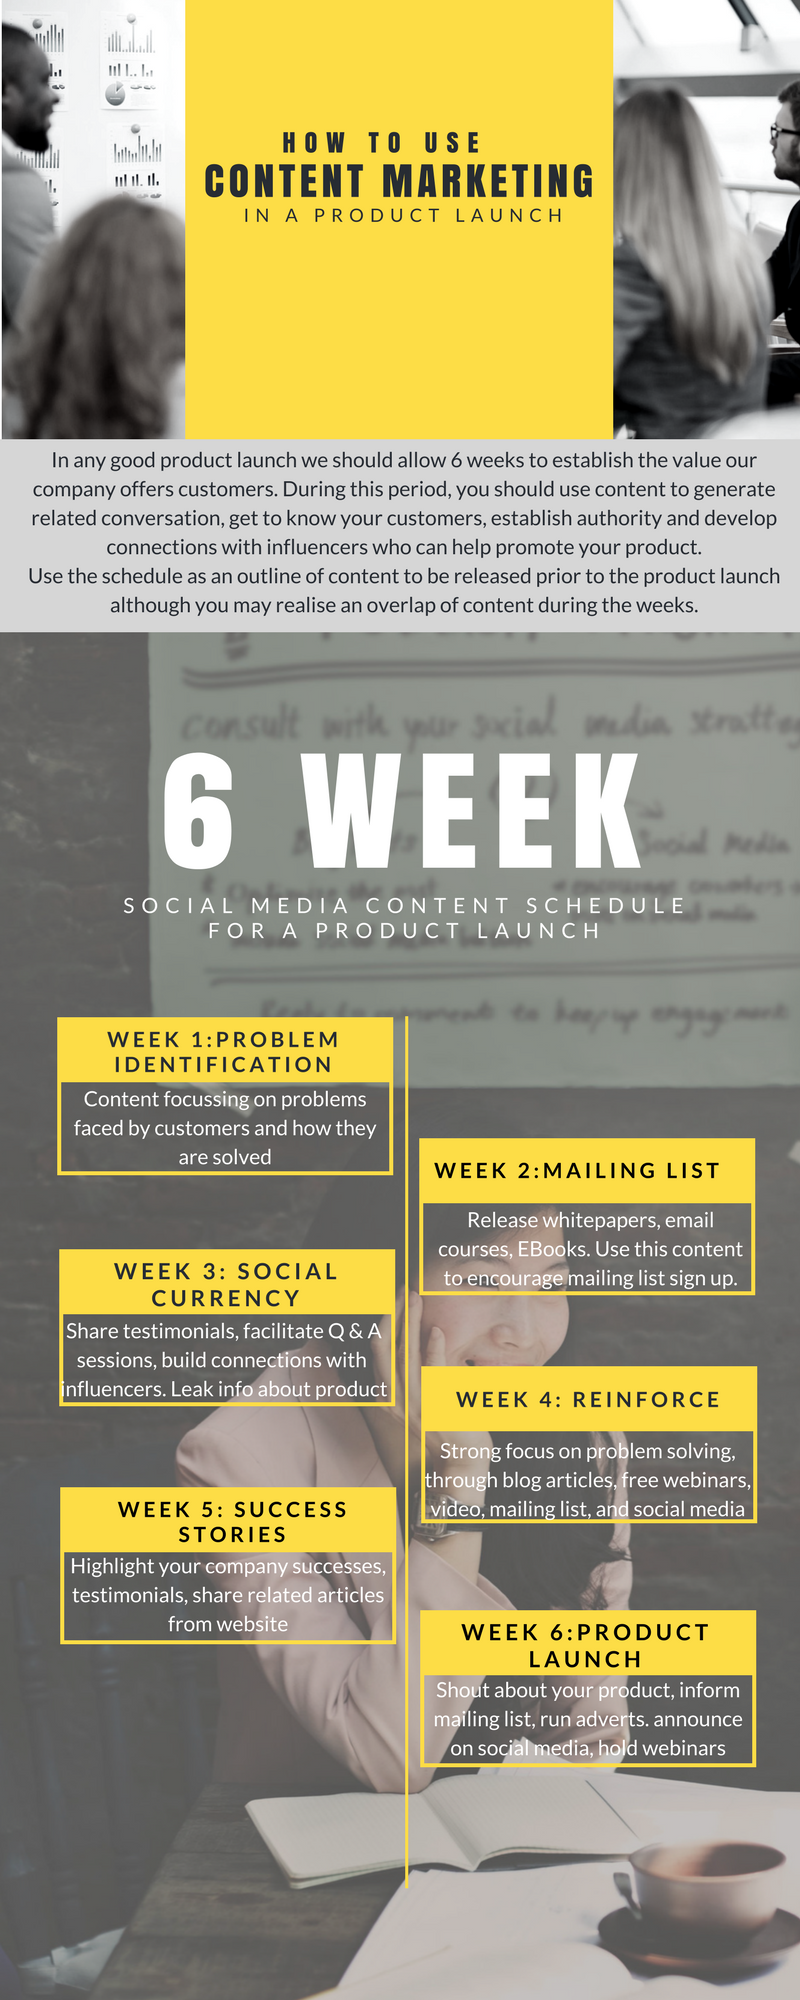 6 Week Social Media Content Schedule Outline for a Product Launch